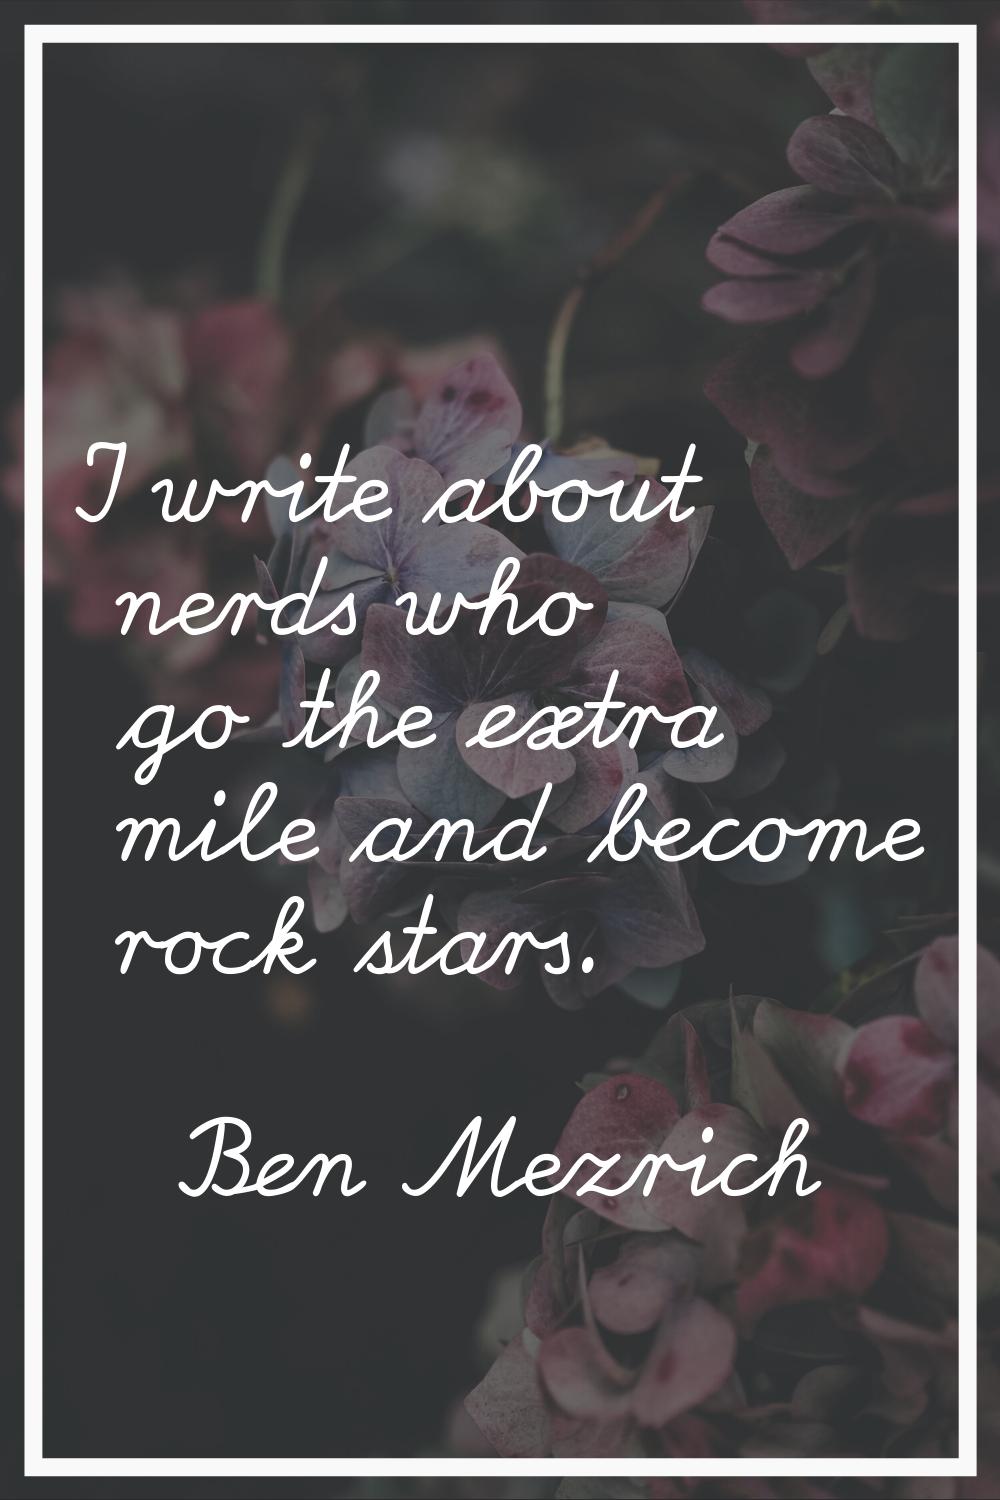 I write about nerds who go the extra mile and become rock stars.